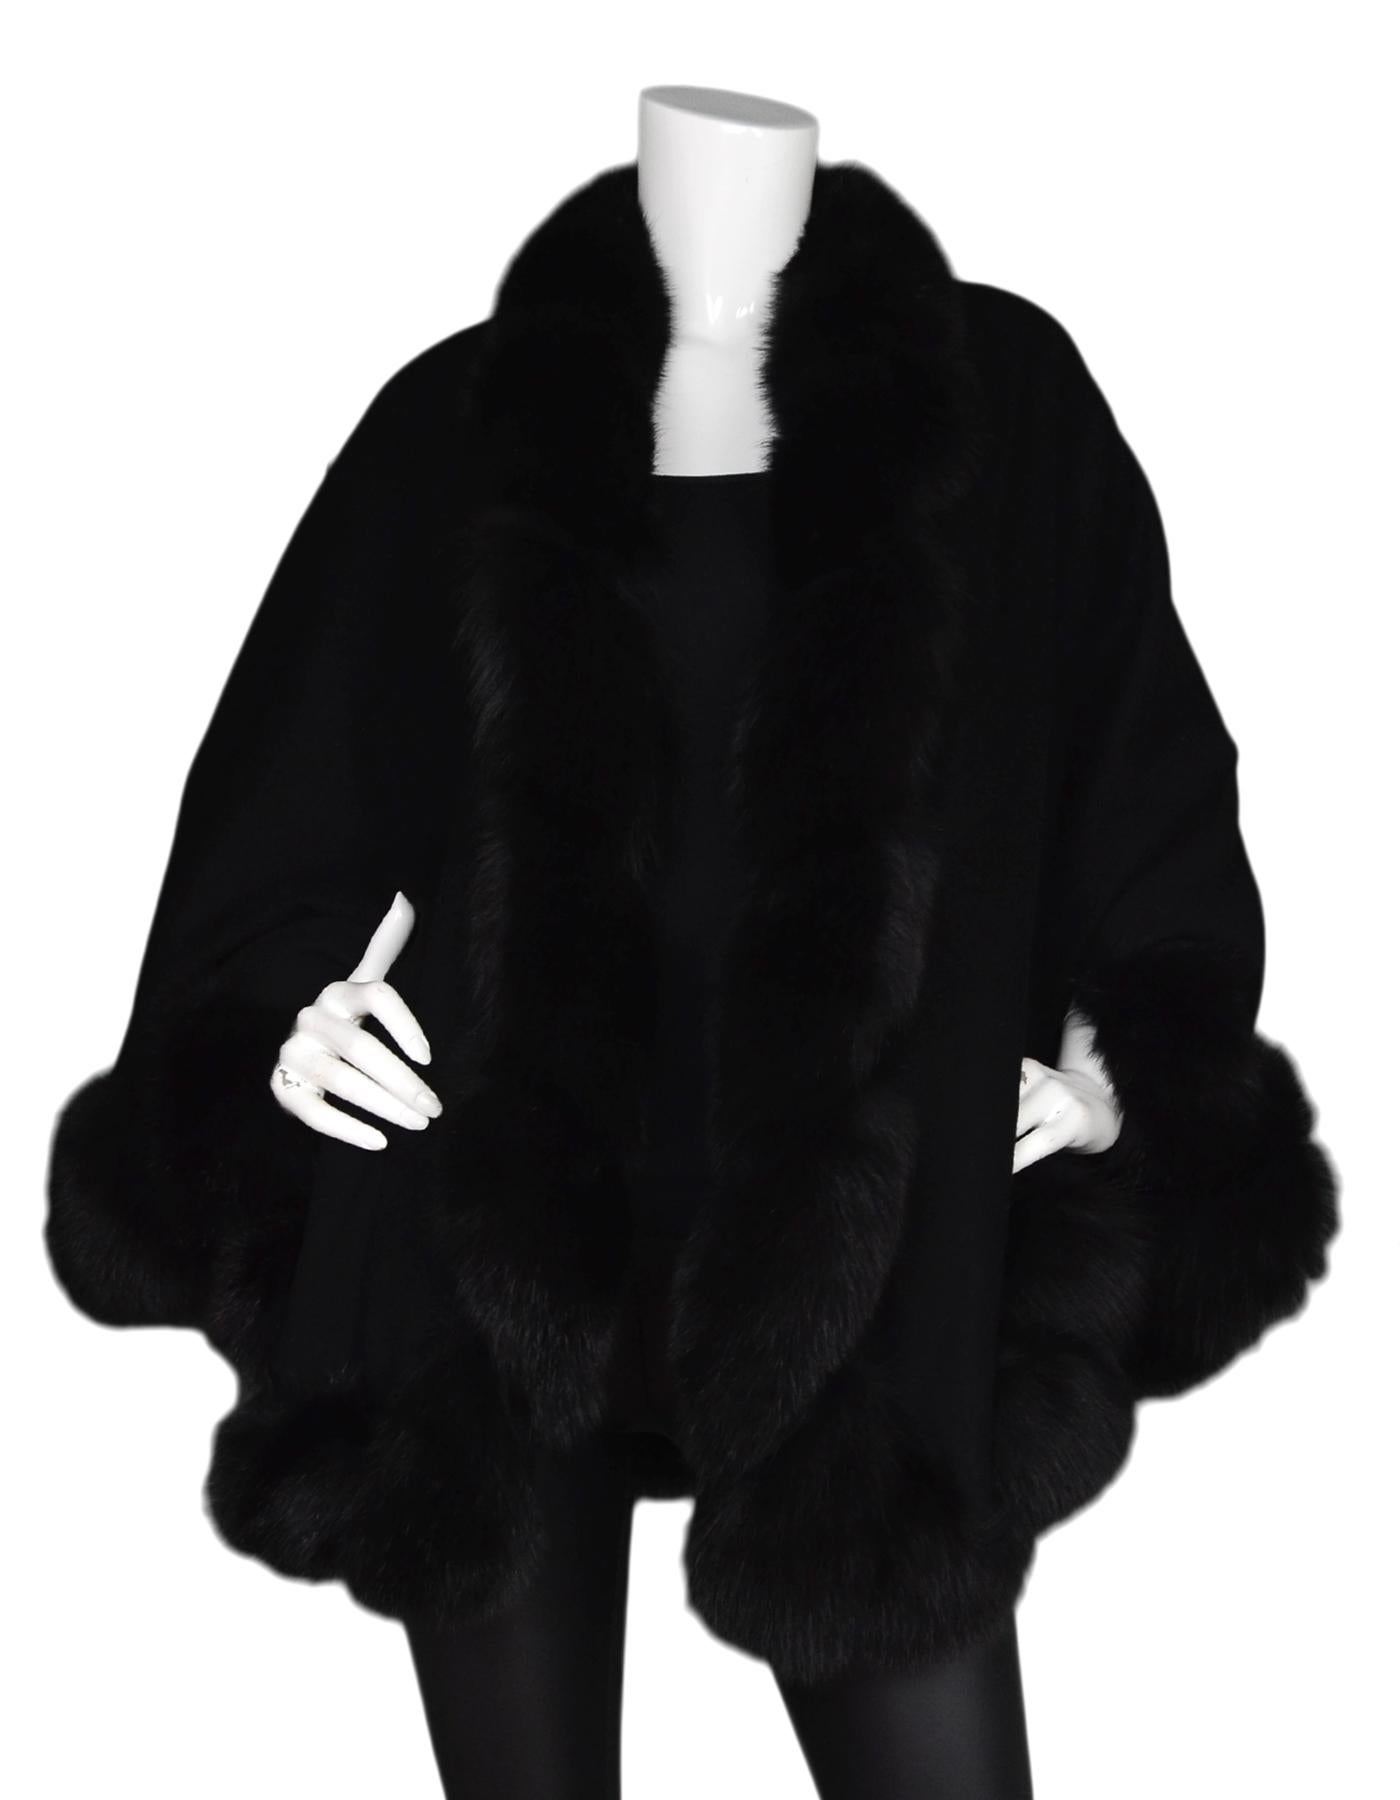 Black Cashmere Cape W/ Mink Trim 

Made In:  England
Color: Black
Materials: 100% cashmere, mink trim
Opening/Closure: Open front
Overall Condition: Excellent pre-owned condition 

Measurements: 
Across Center: 74